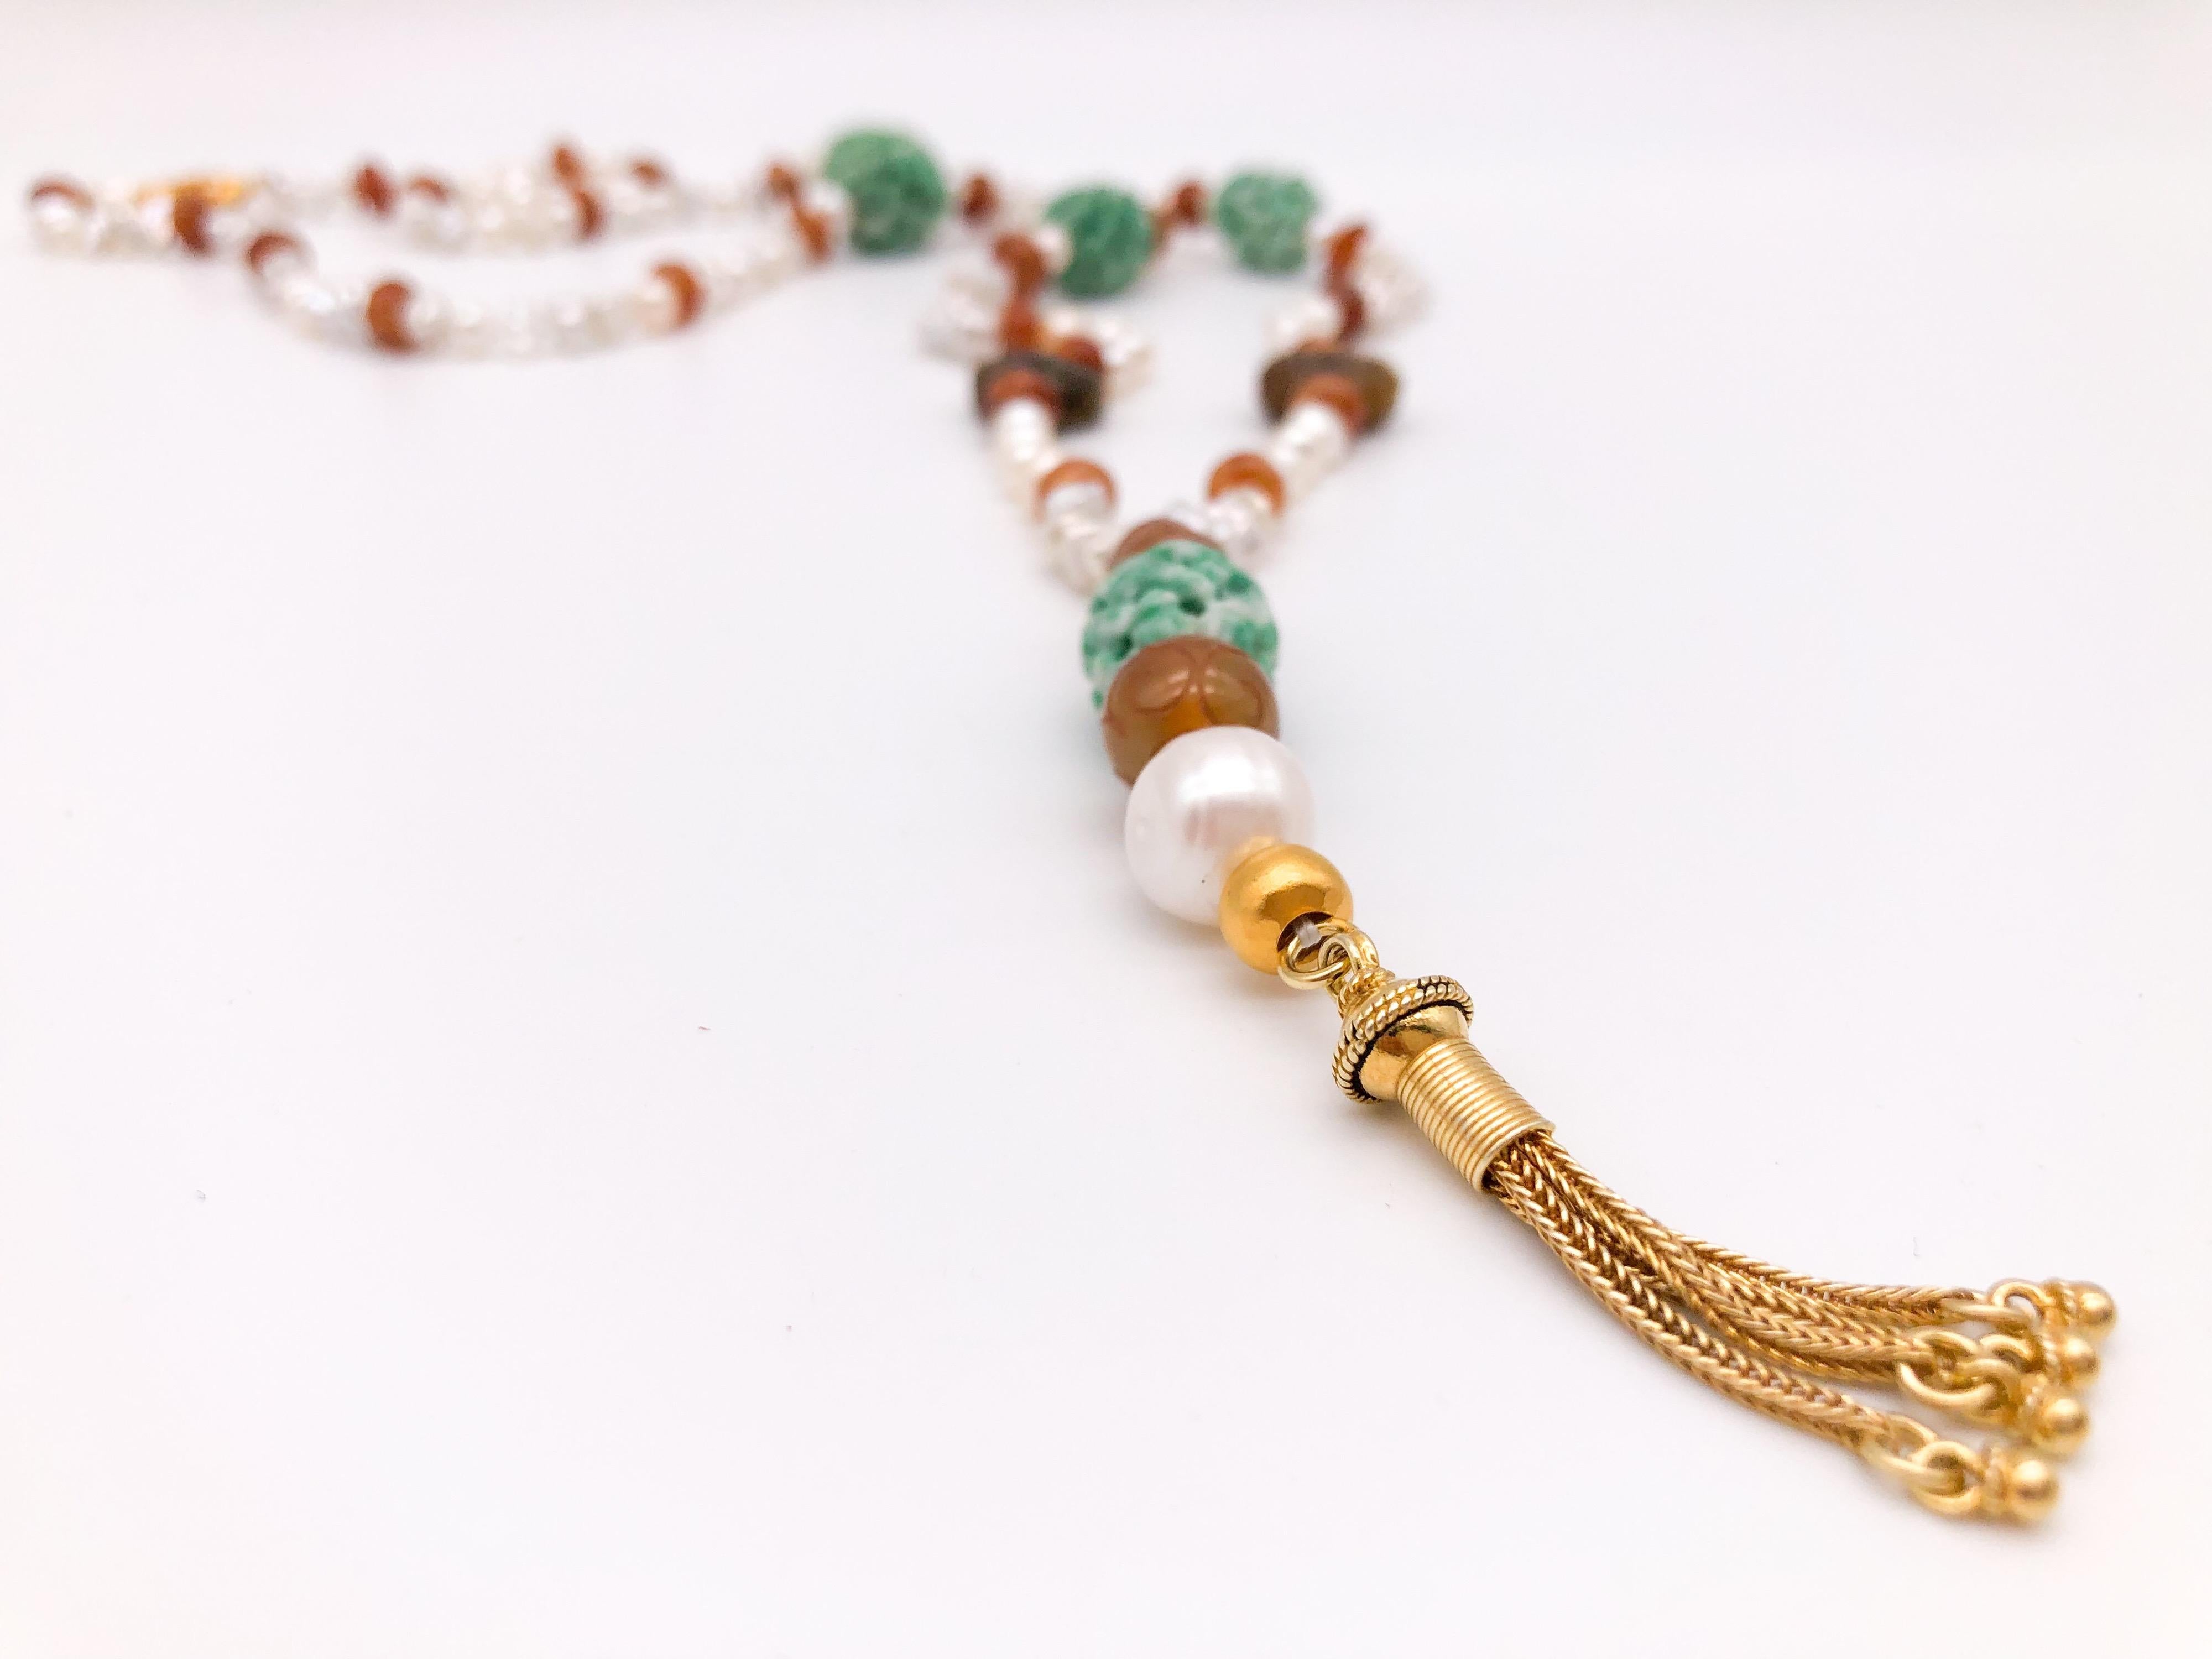 A.Jeschel Splendid Long Pearl, Hessonite, and Tobacco Jade Necklace 2